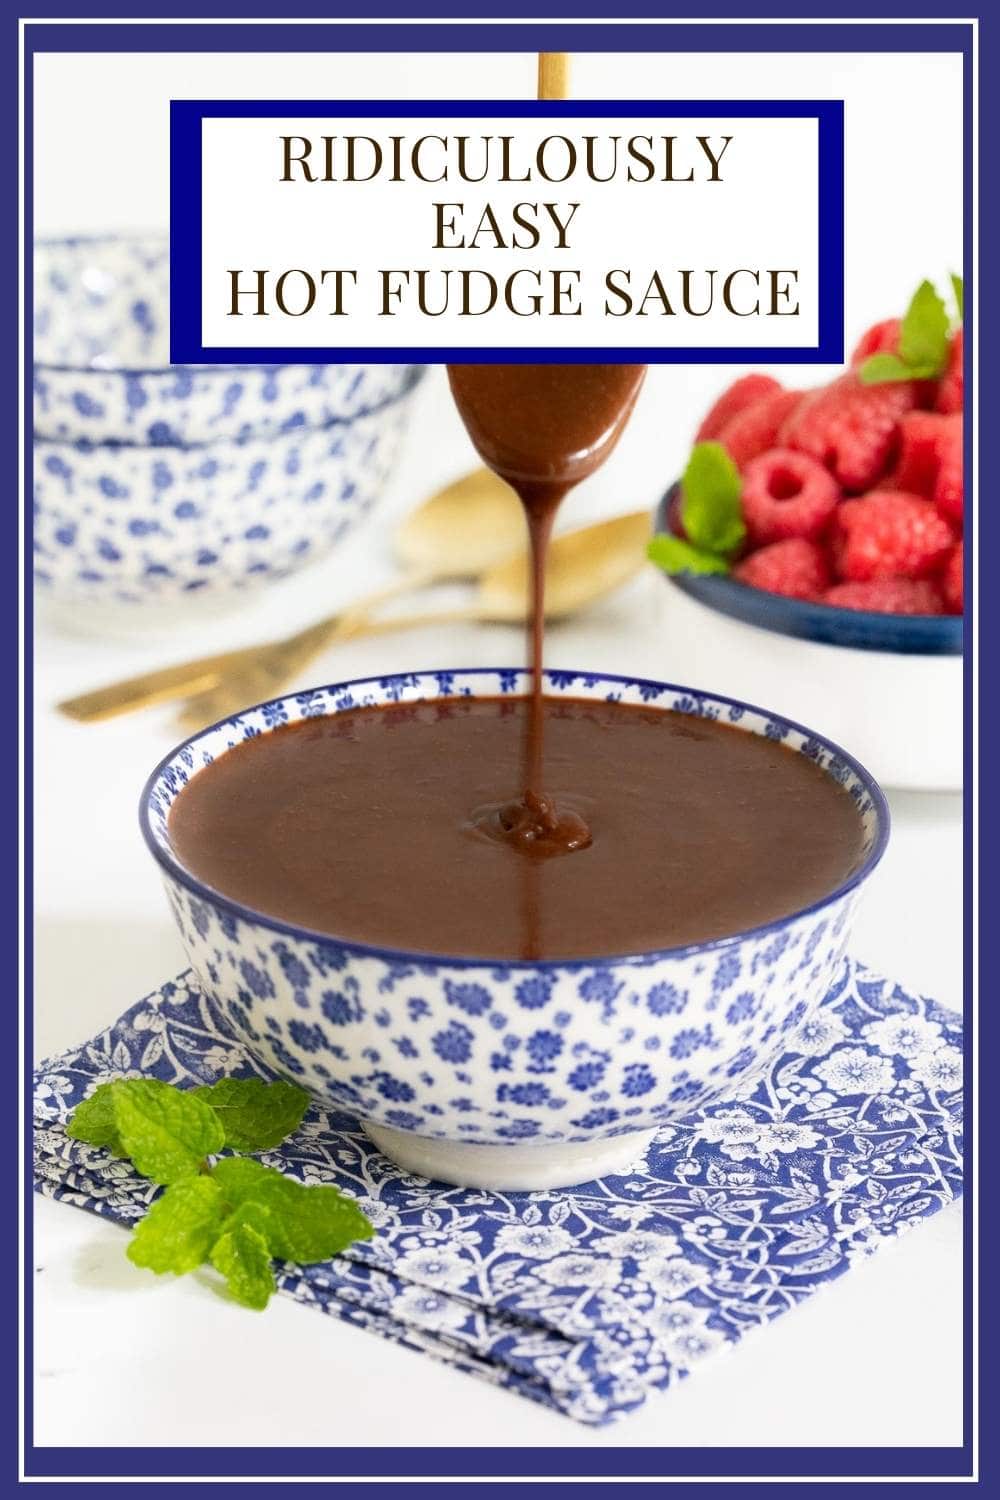 Ridiculously Easy Hot Fudge Sauce